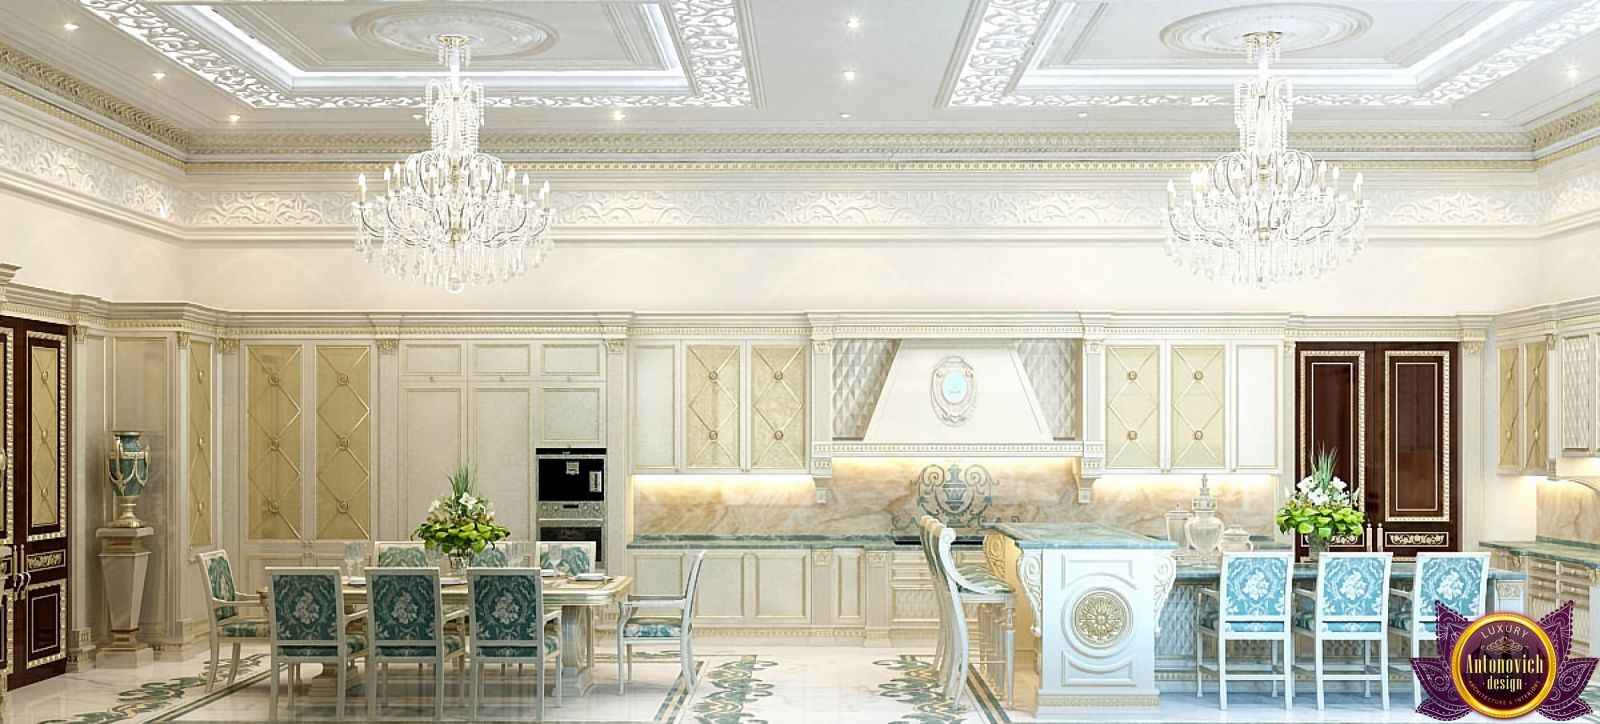 Luxurious kitchen with high-end appliances and elegant finishes